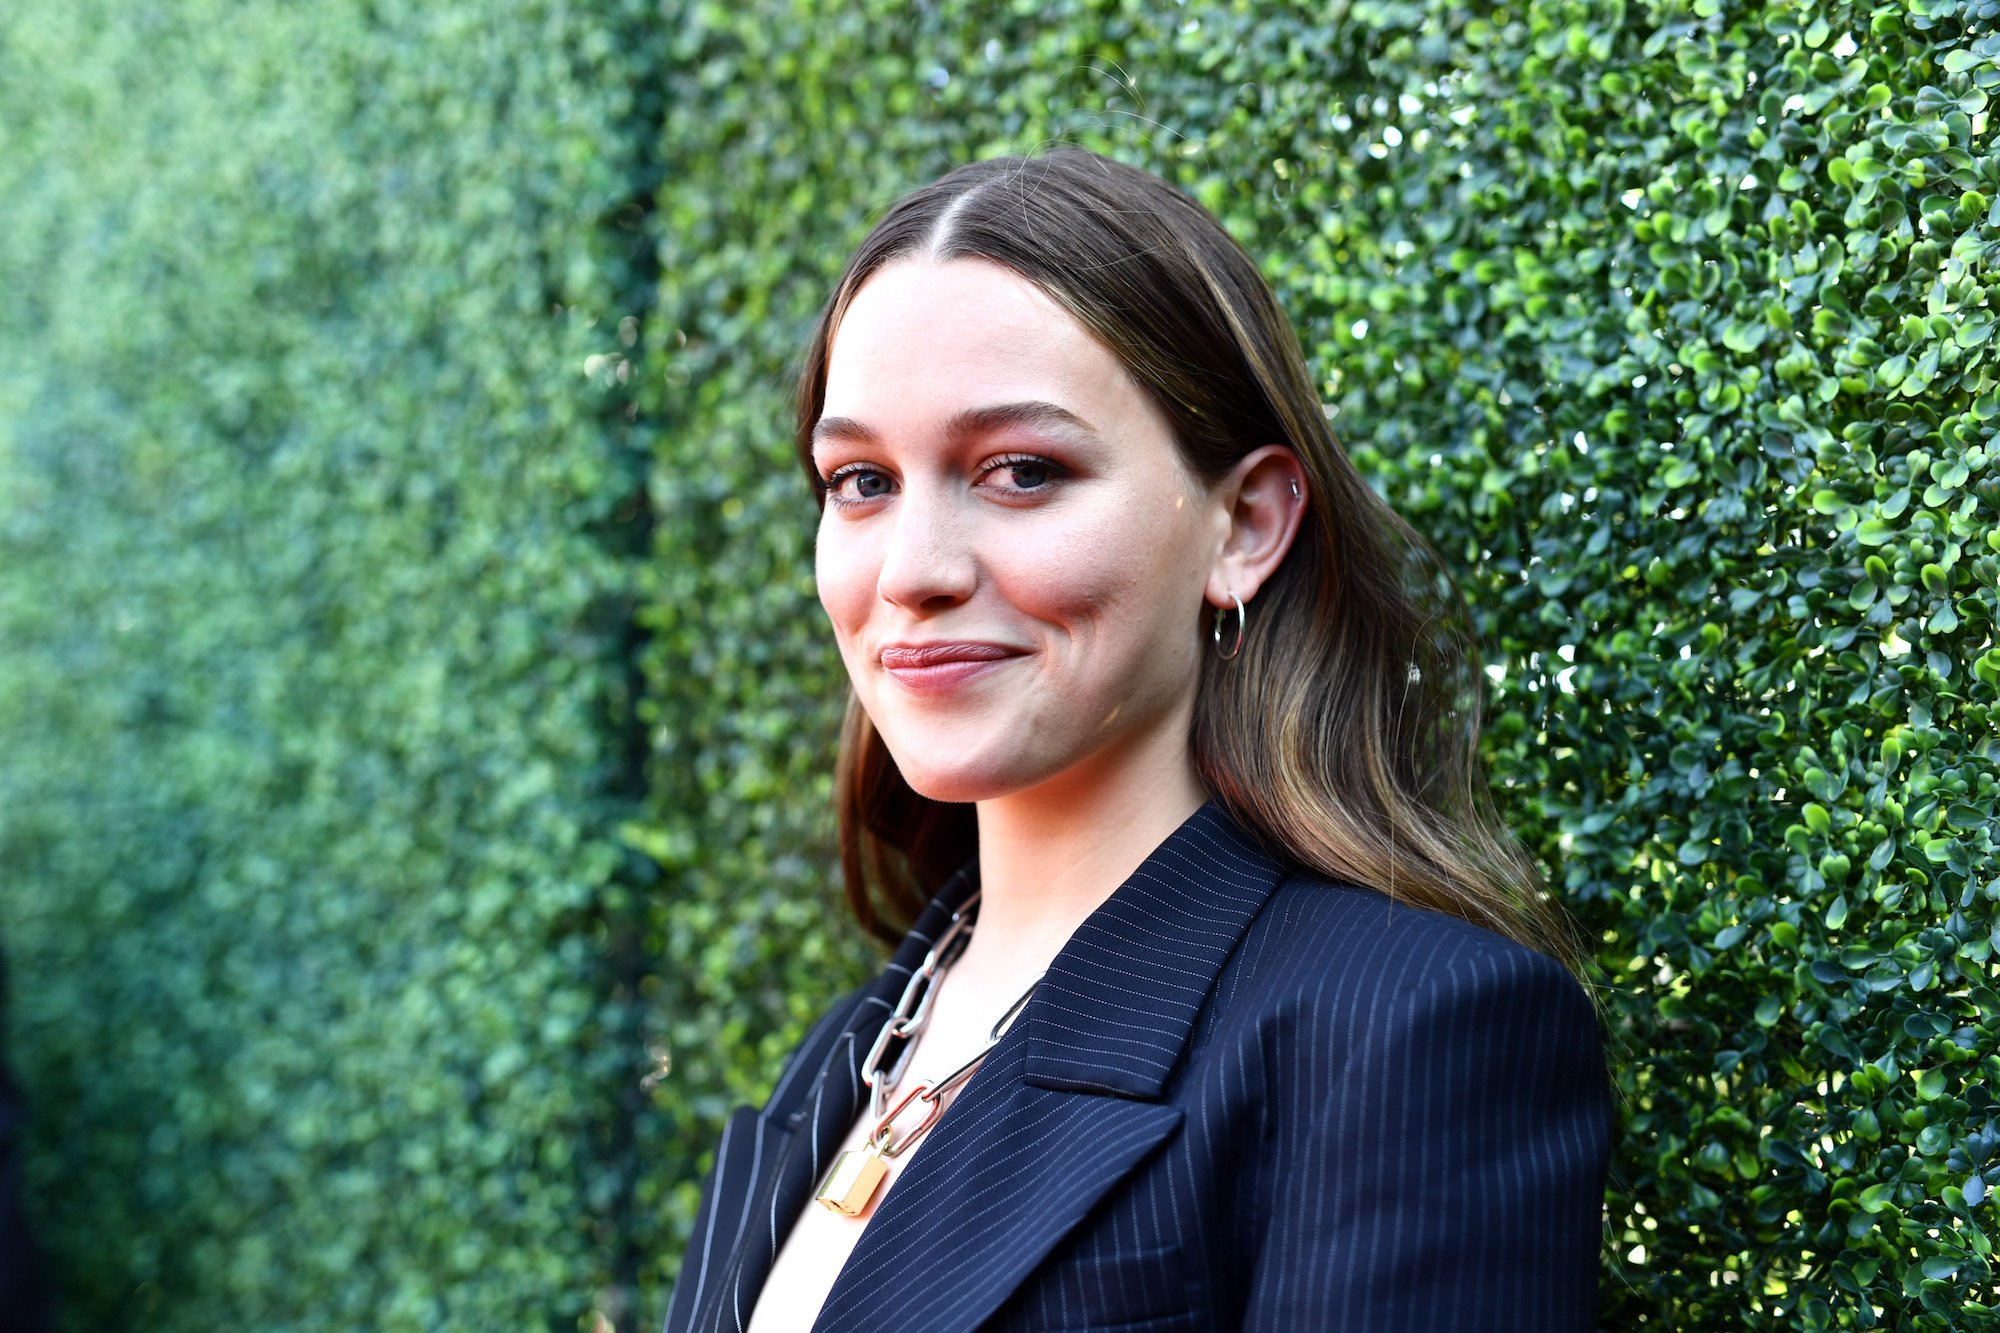 Victoria Pedretti at the 2019 MTV Movie and TV Awards on June 15, 2019